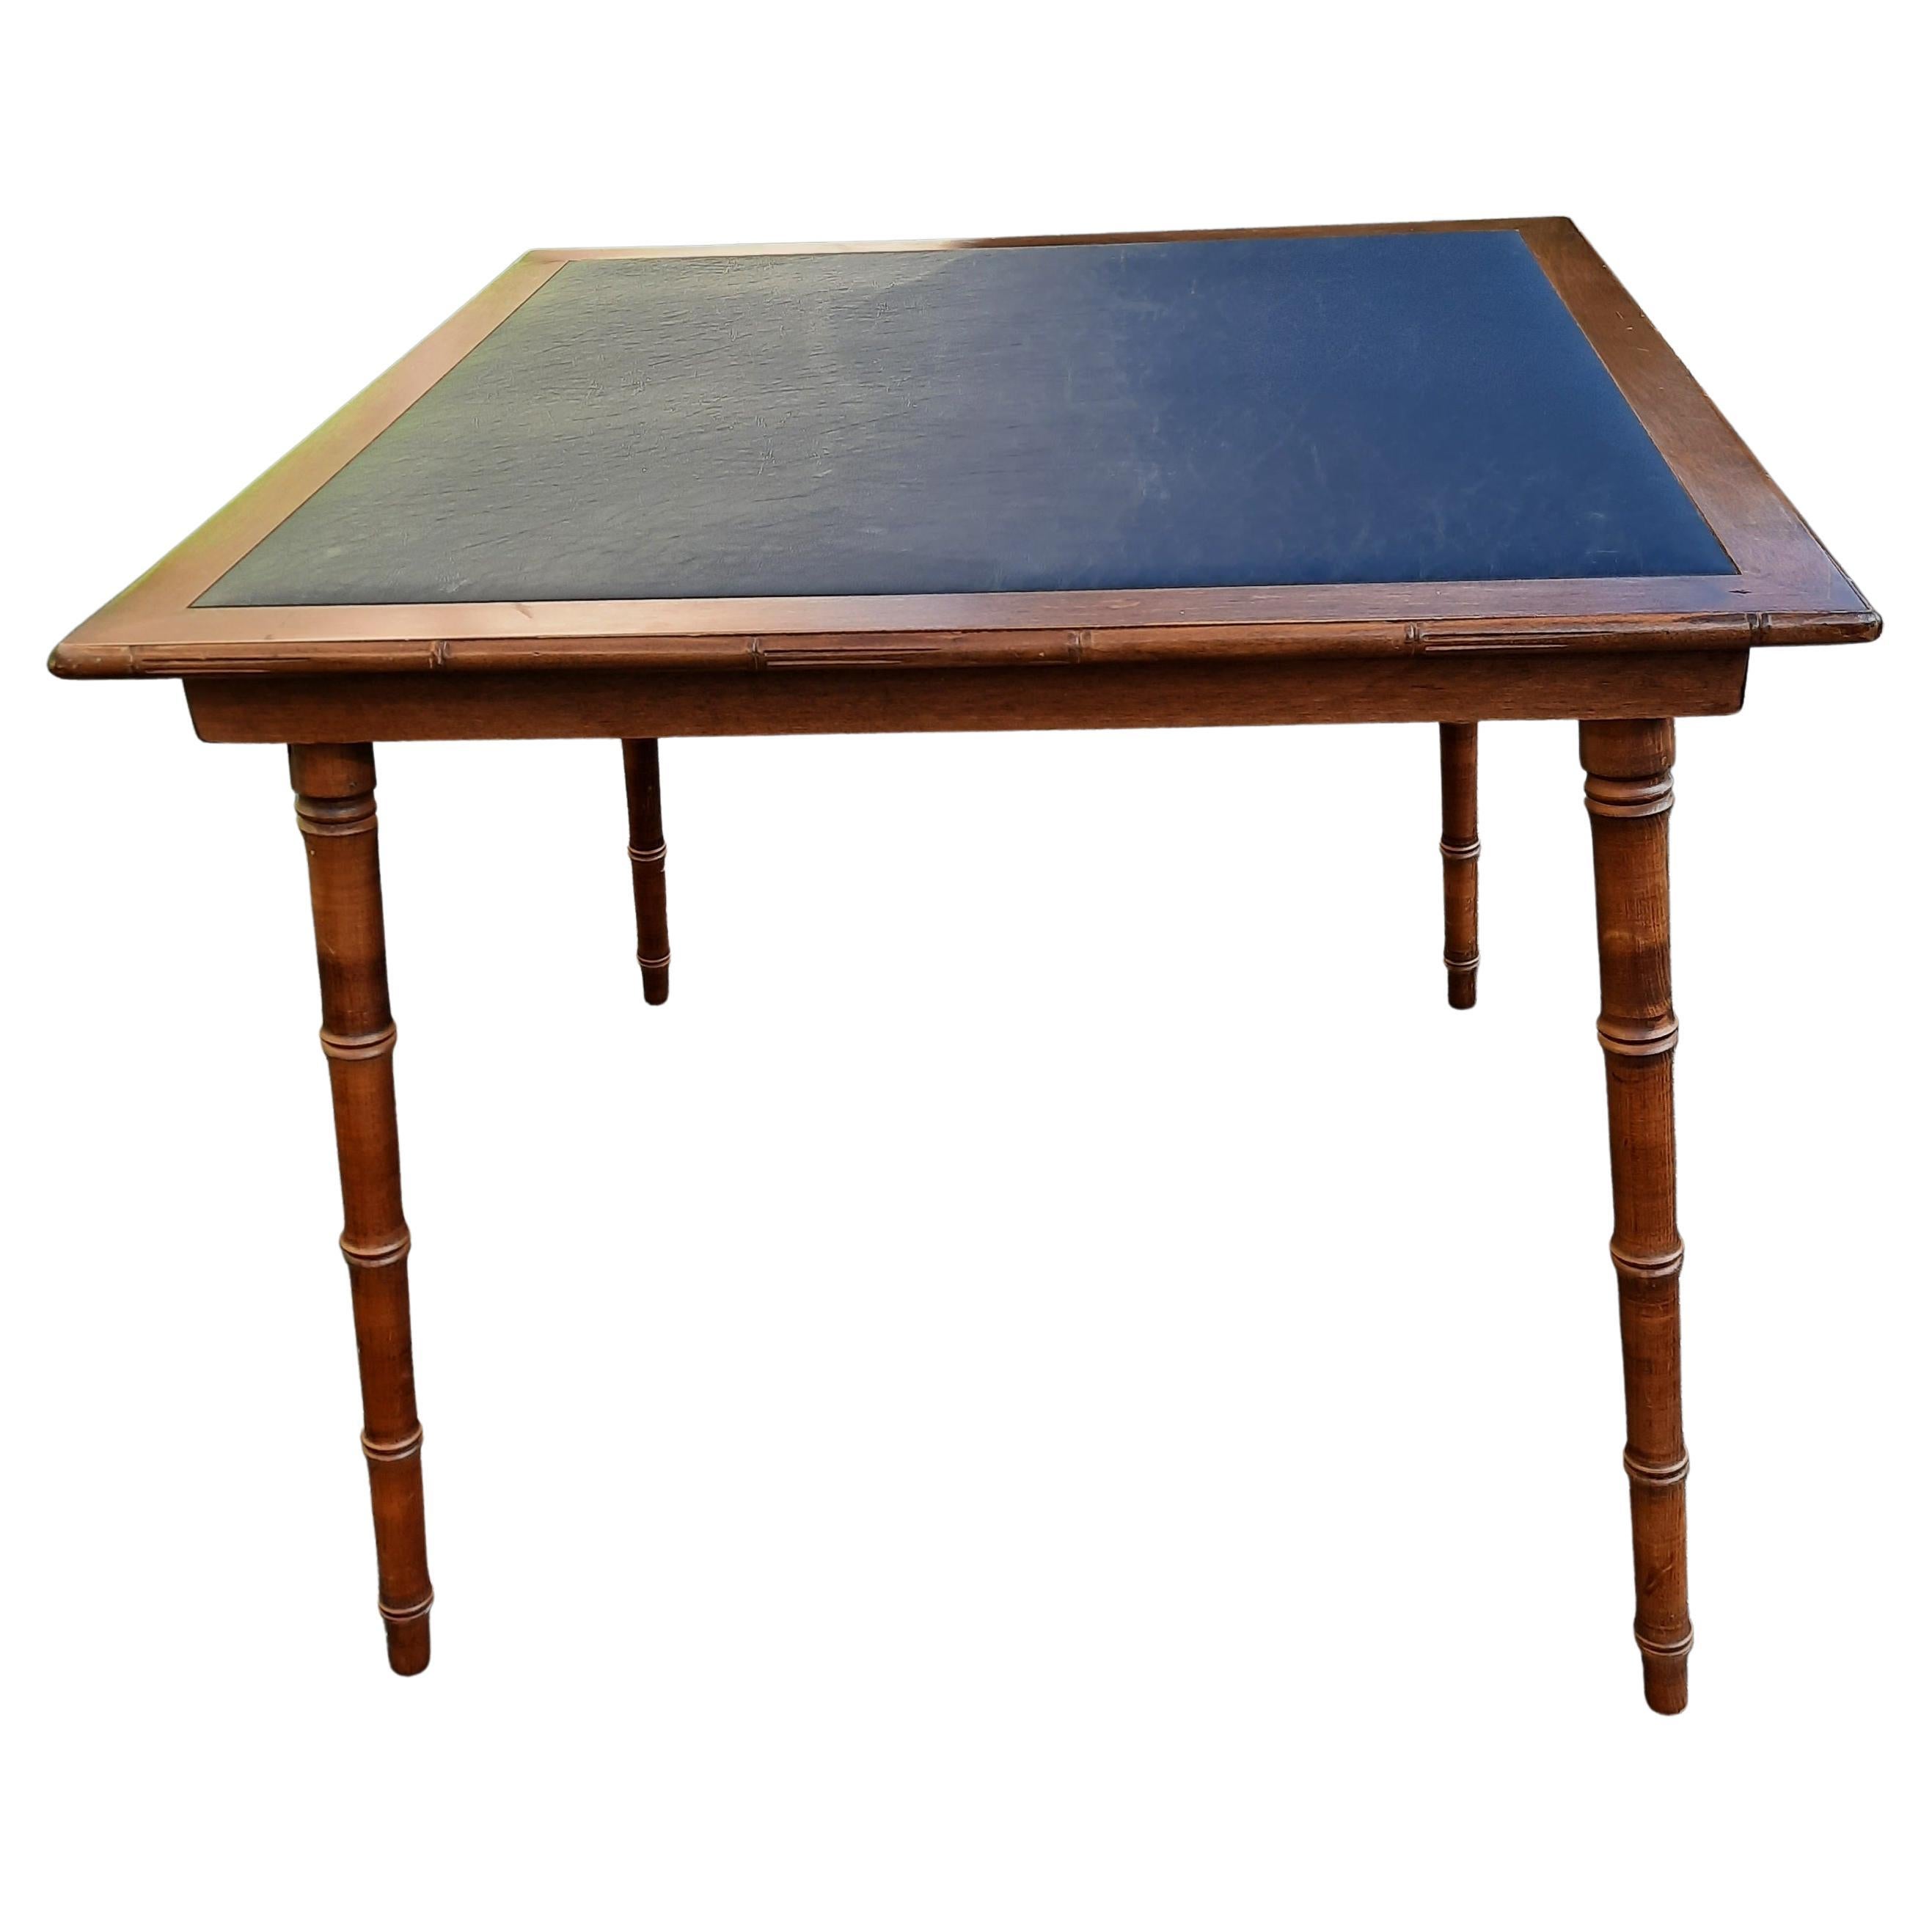 Vintage campaign style mahogany folding card table with faux leather top in very good vintage condition. Black PU leather top in very good condition. Measures 34.5